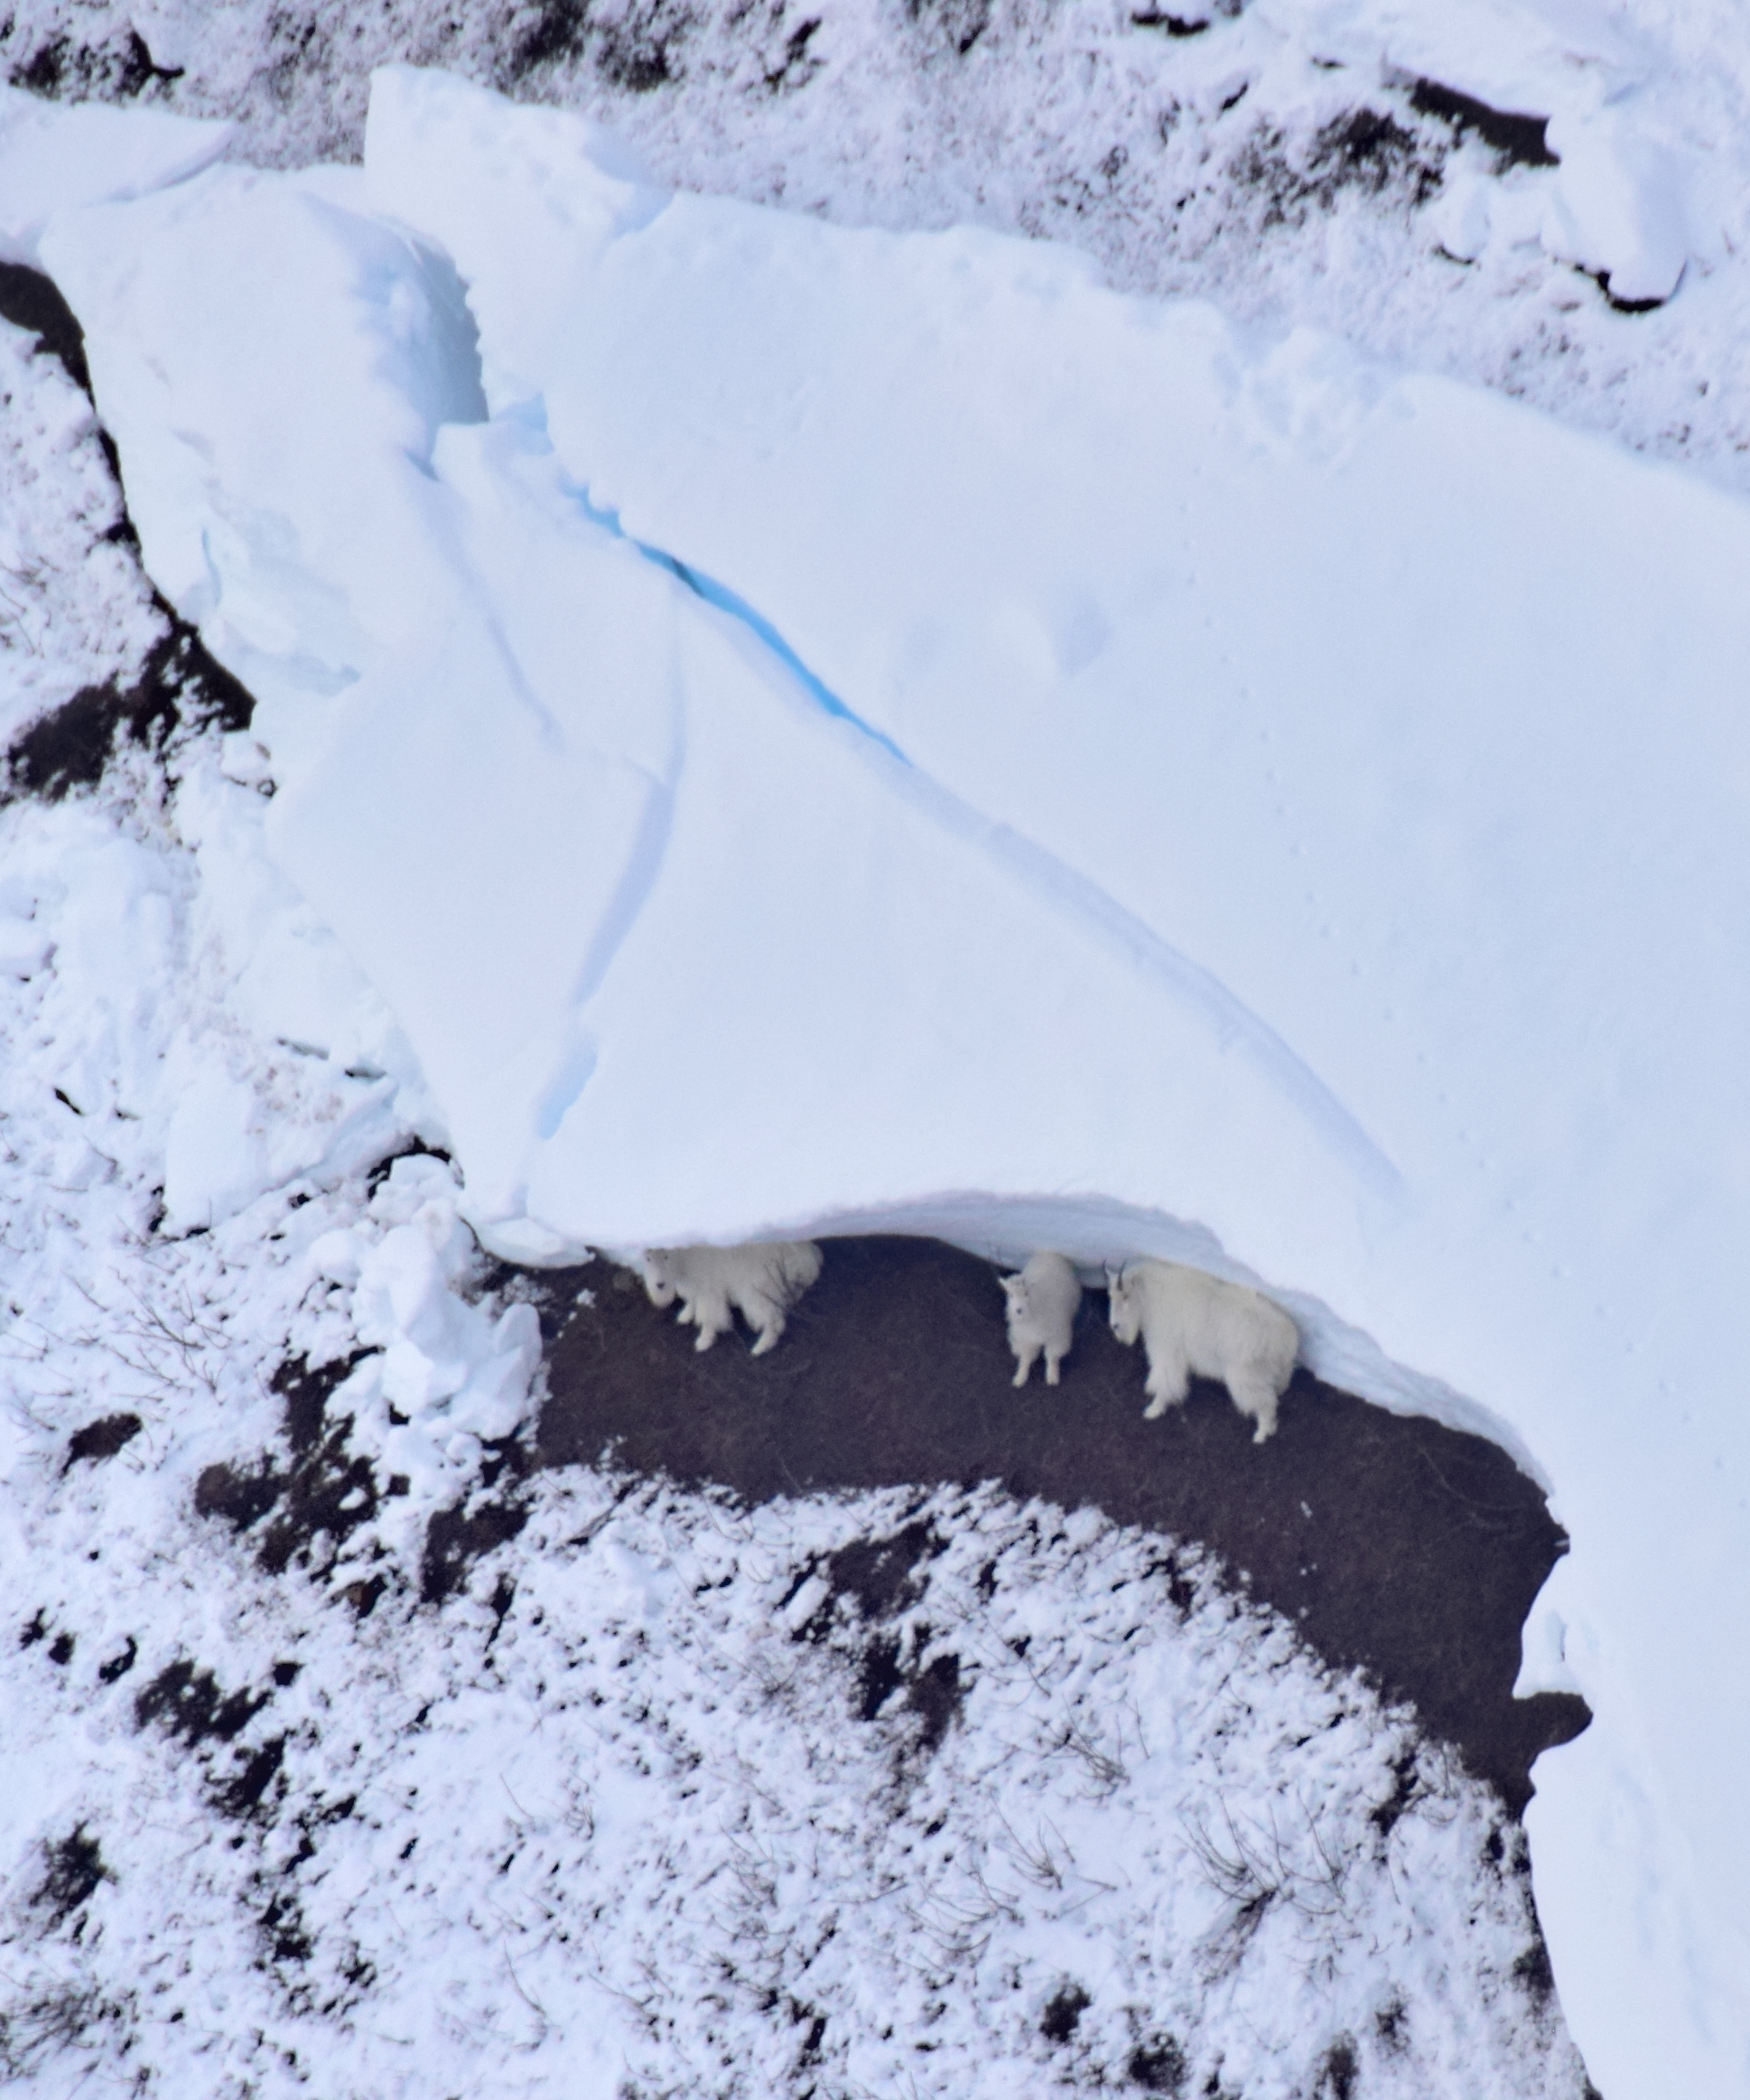 Three mountain goats sheltering underneath an overhang of snow.